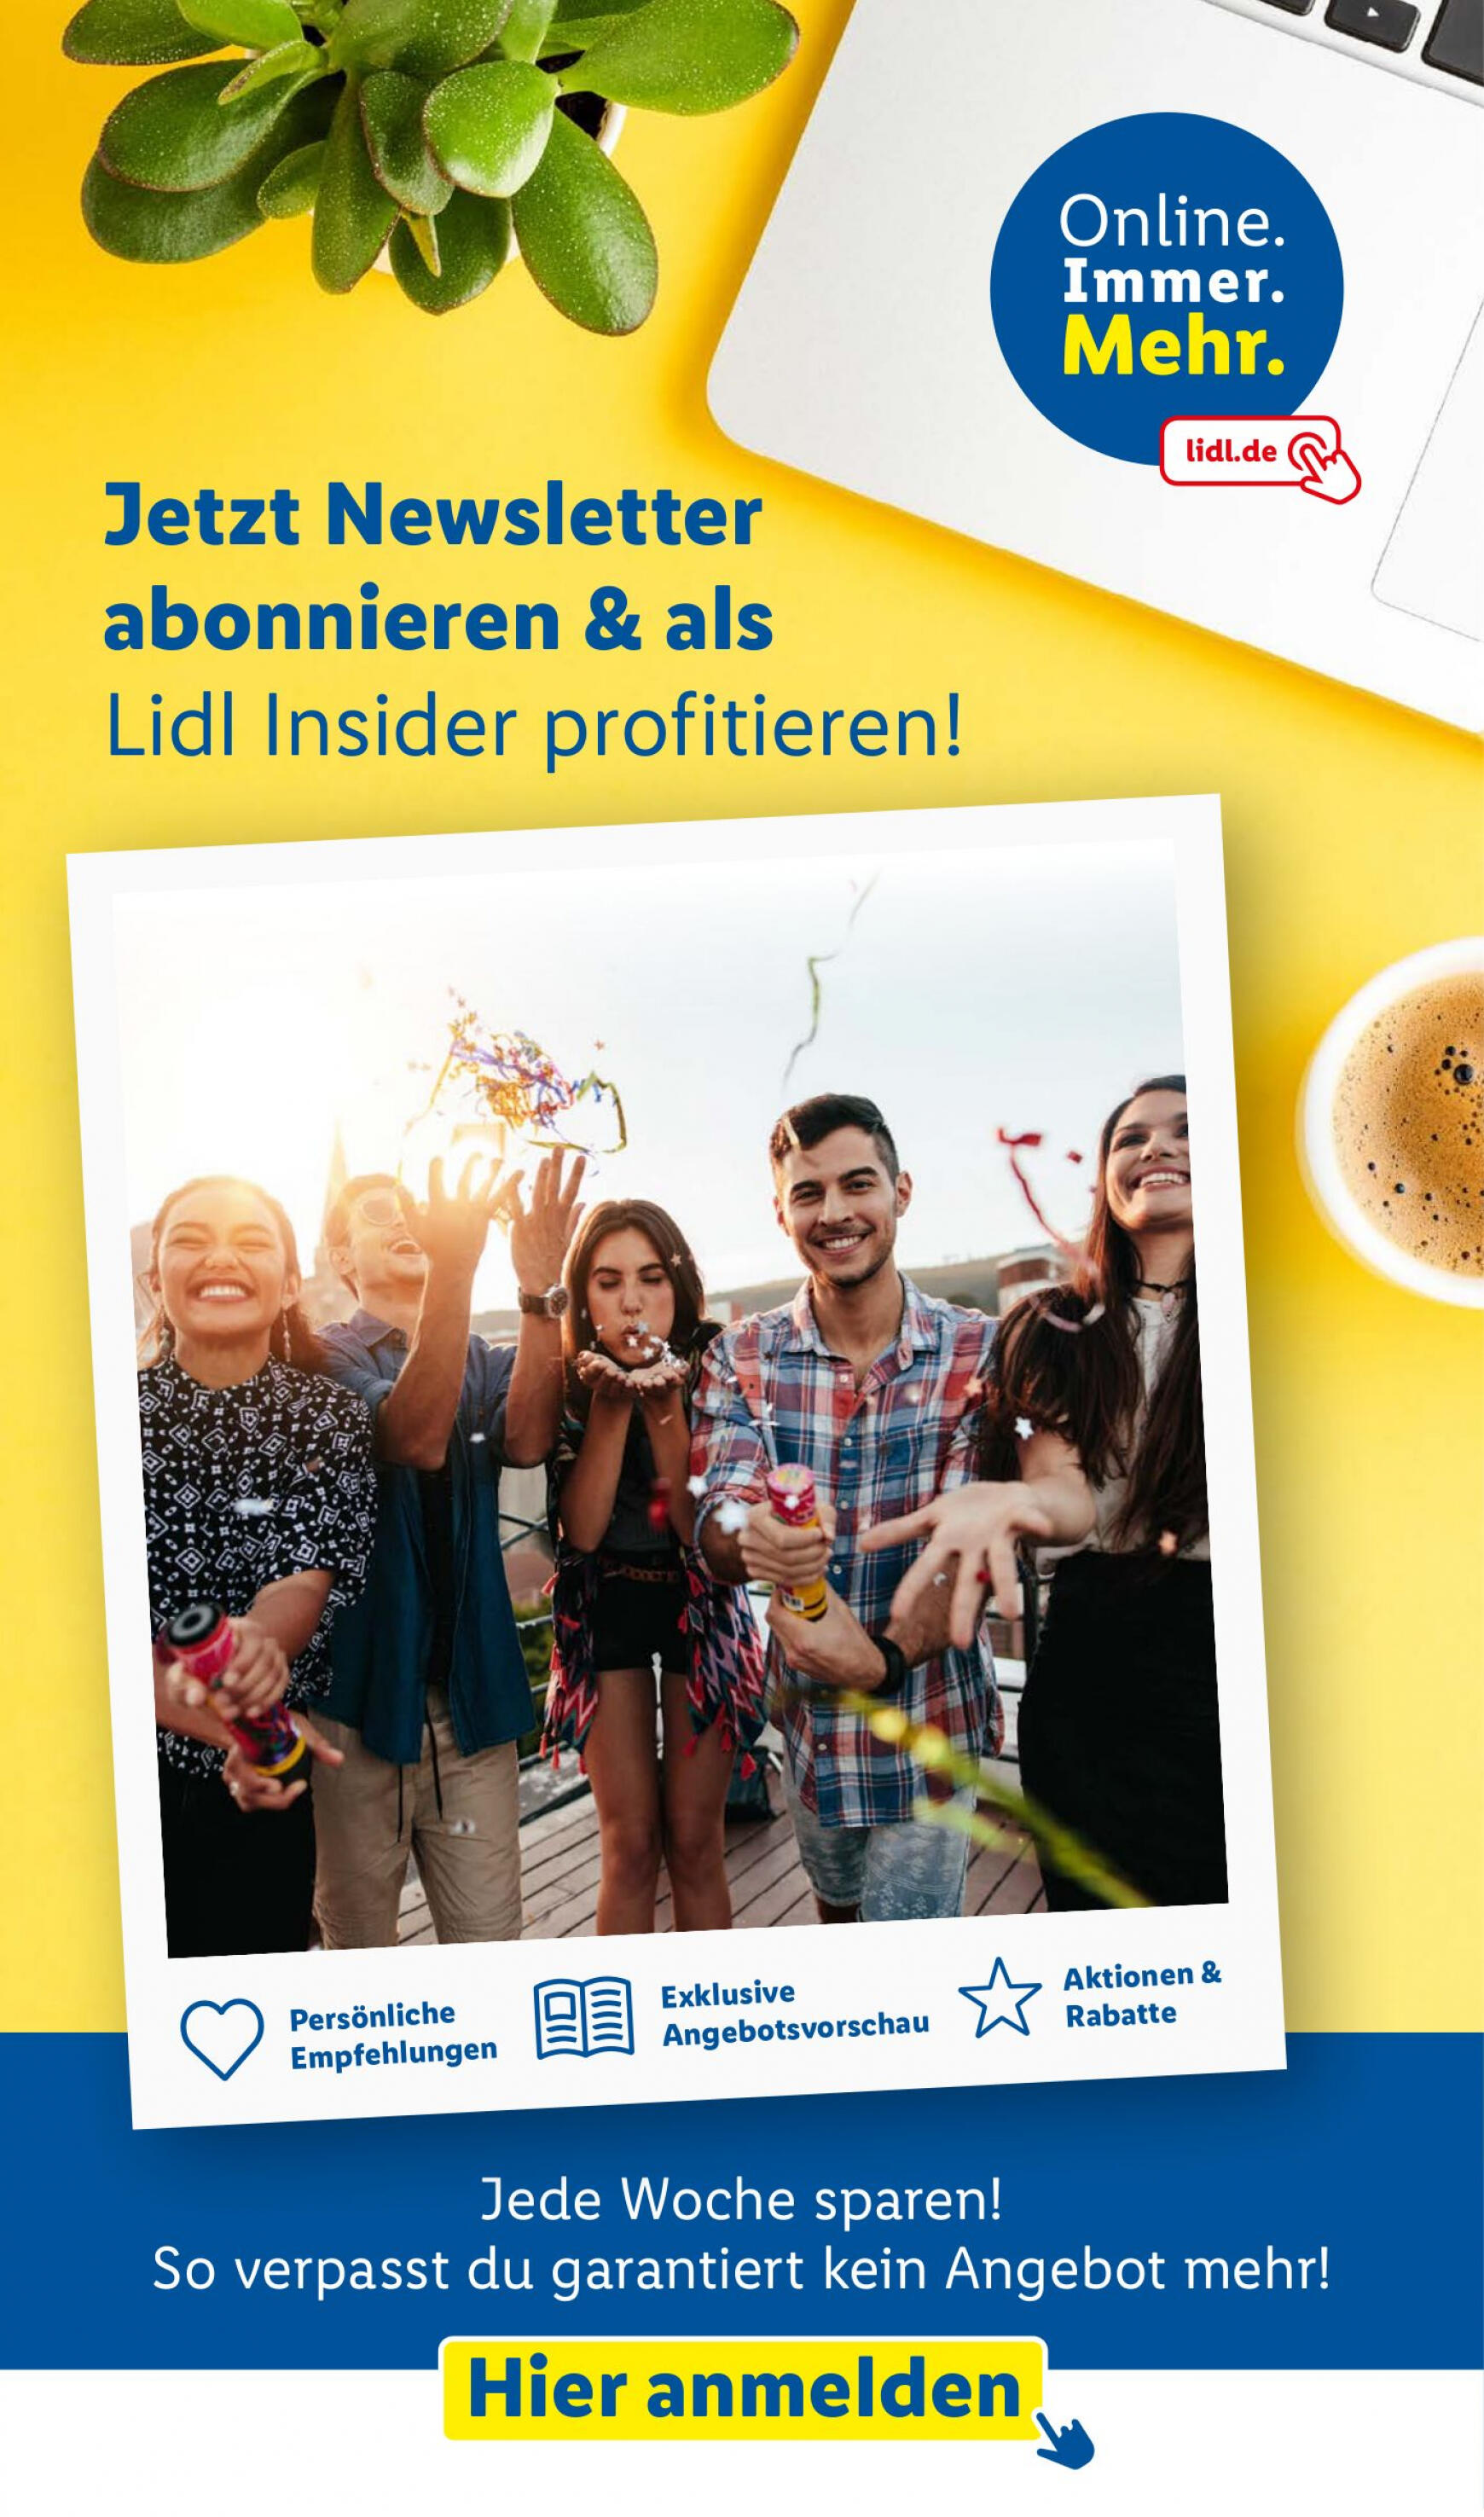 lidl - Flyer Lidl aktuell 13.05. - 18.05. - page: 61